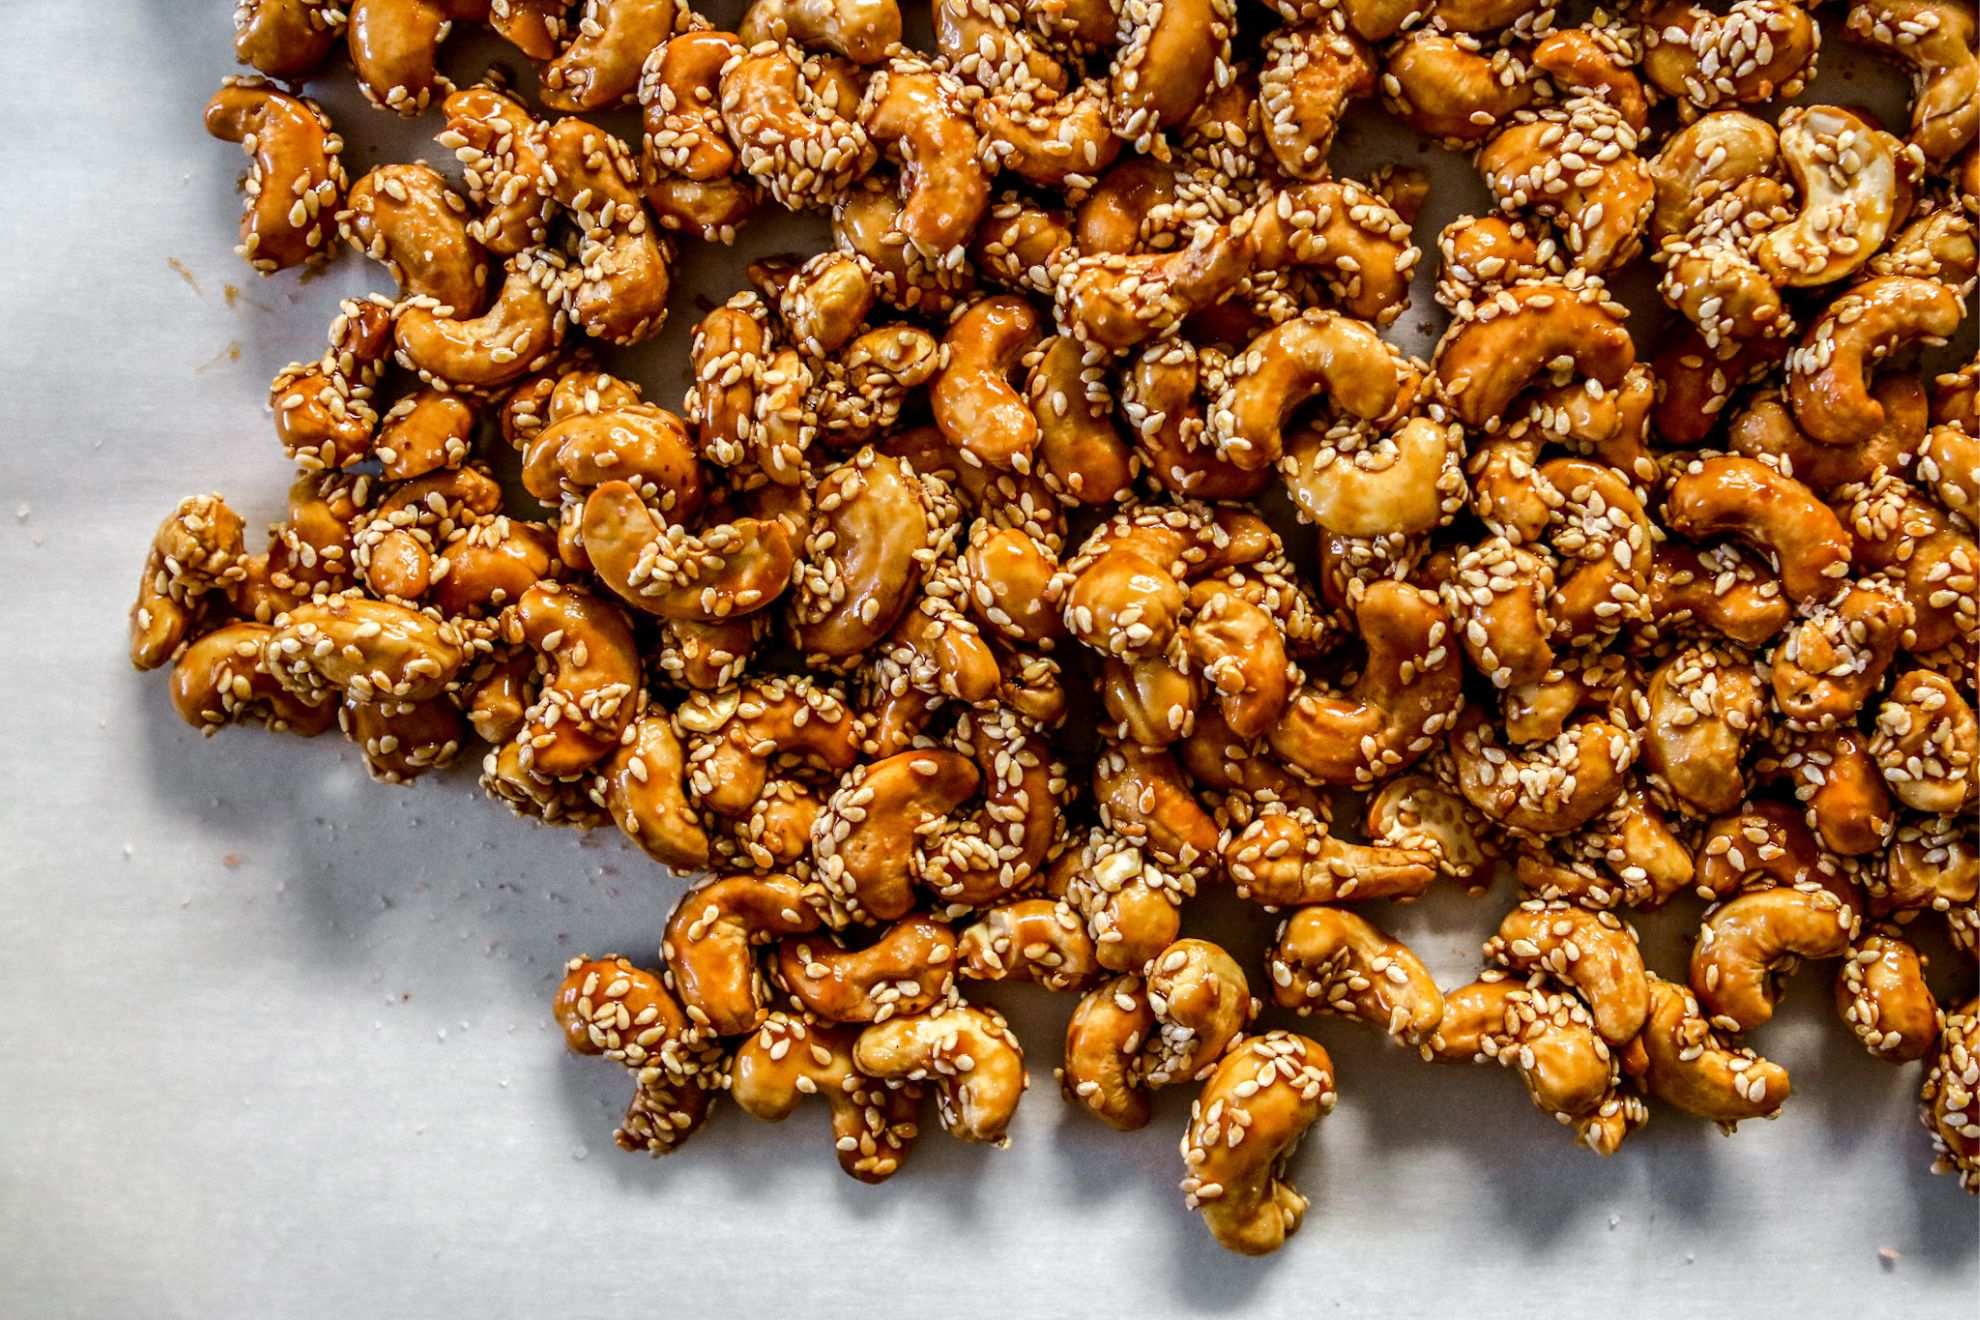 This is an overhead horizontal image of cashews coated with sesame seeds and a caramel coating. The cashews are all very close together and on a white background.